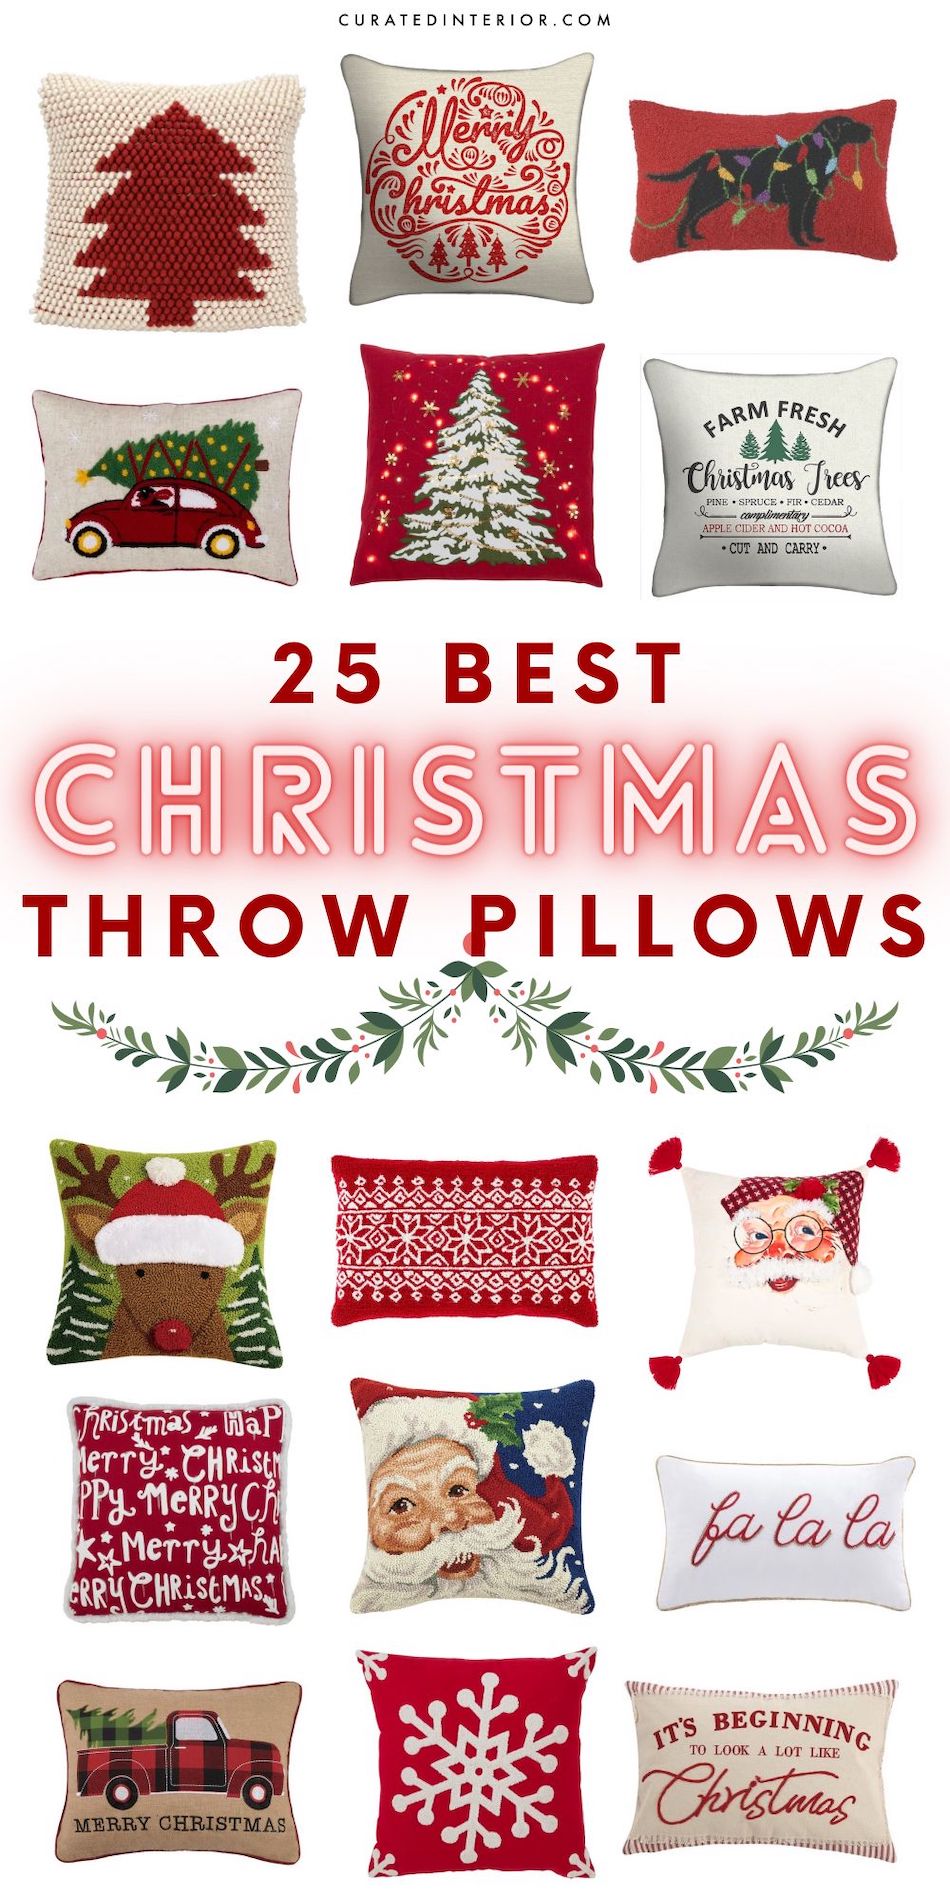 25 Best Christmas Throw Pillows for 2020